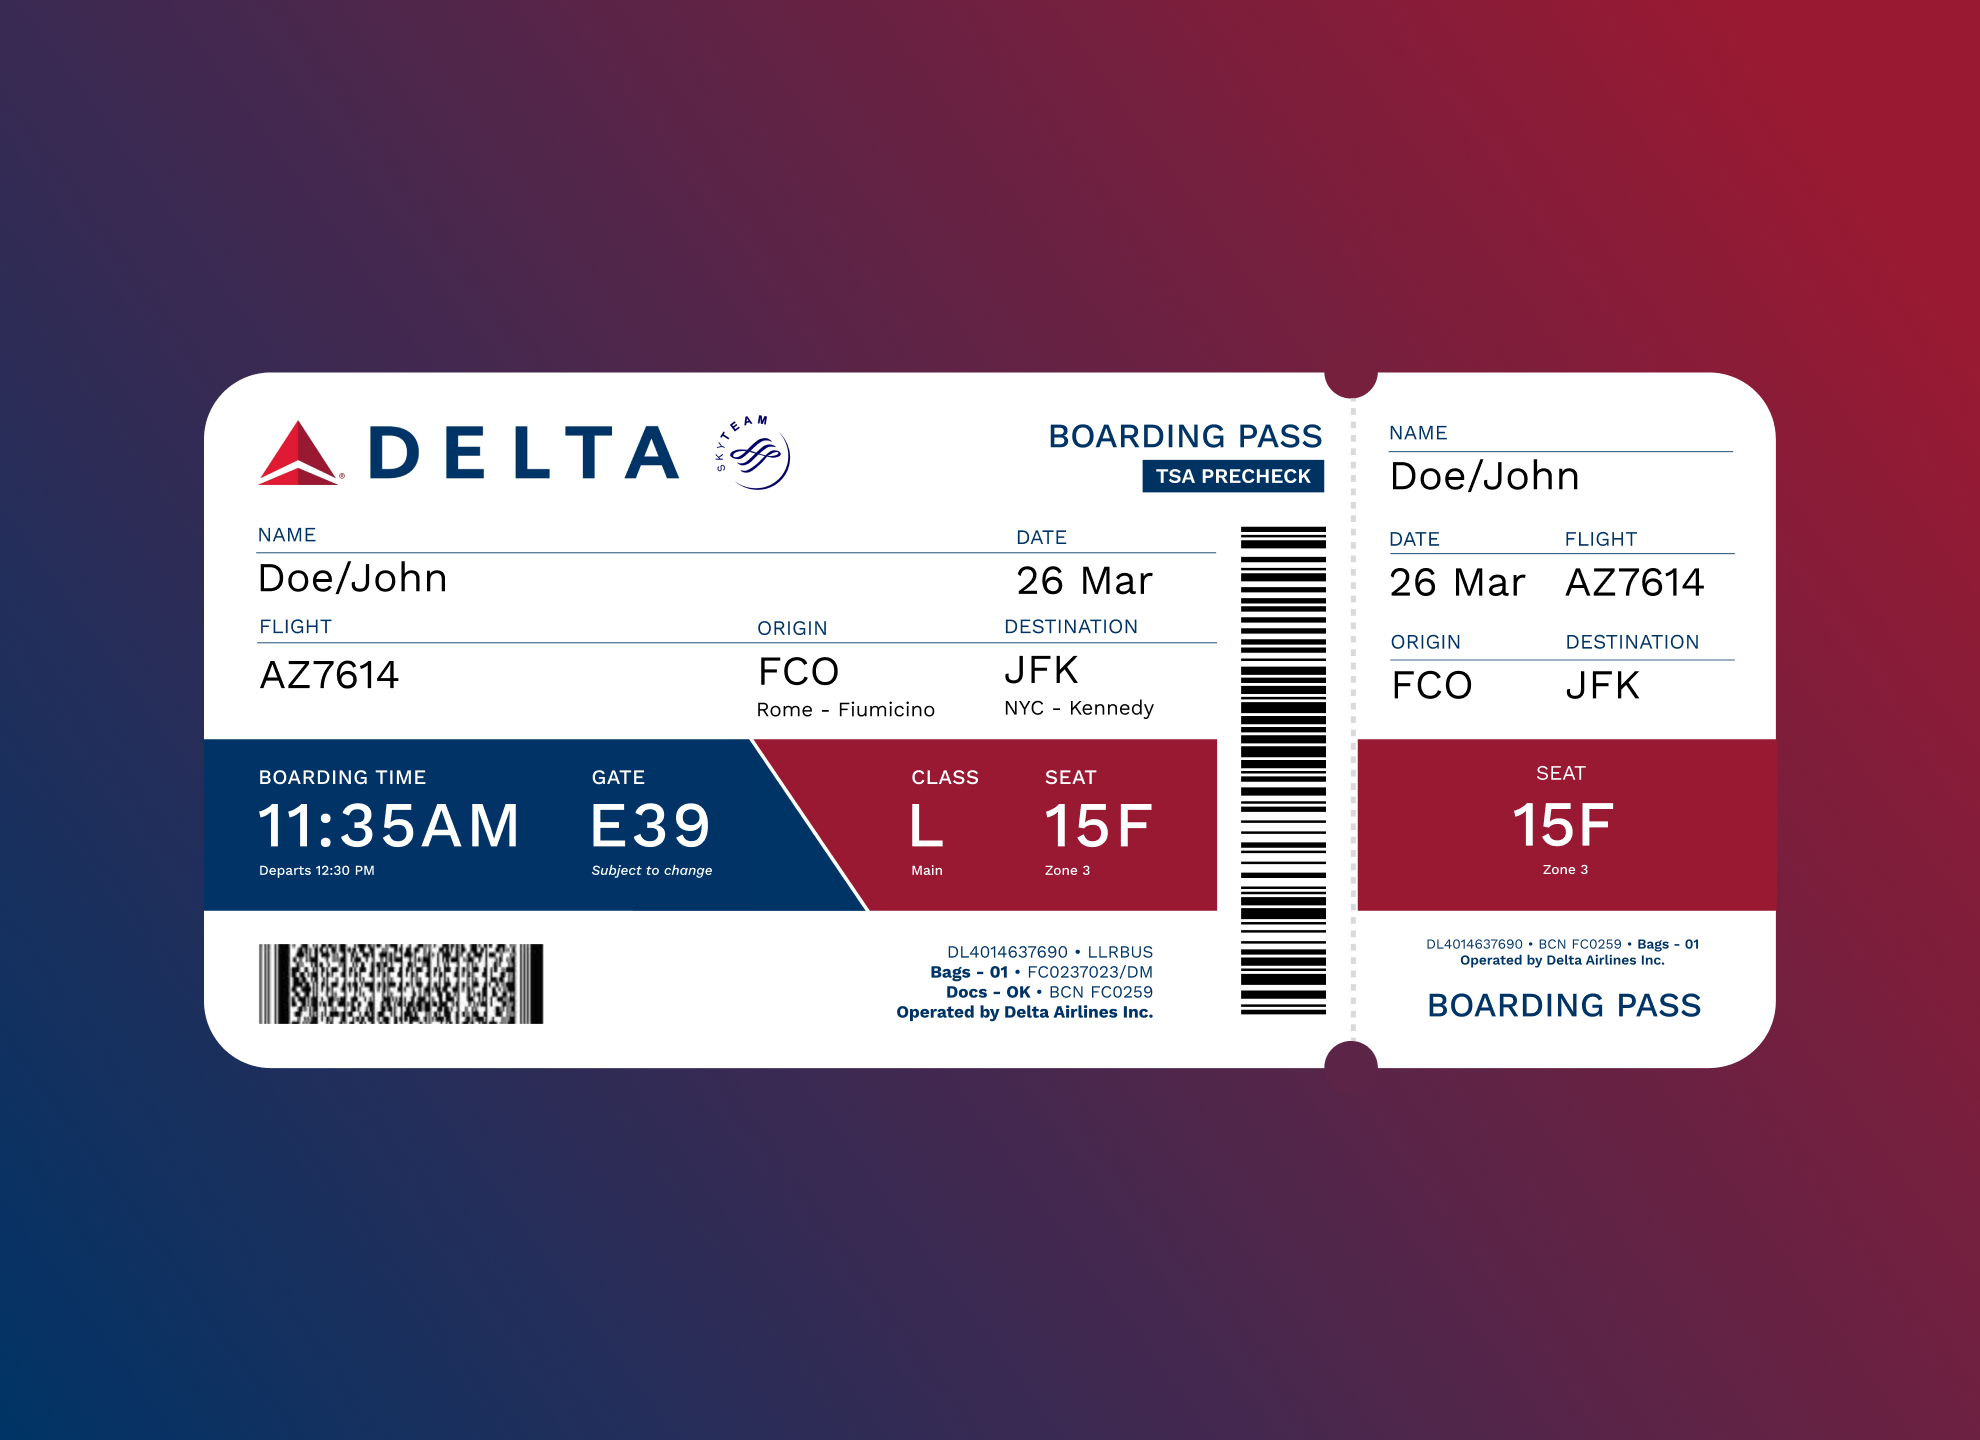 Delta Boarding Pass Redesign picture